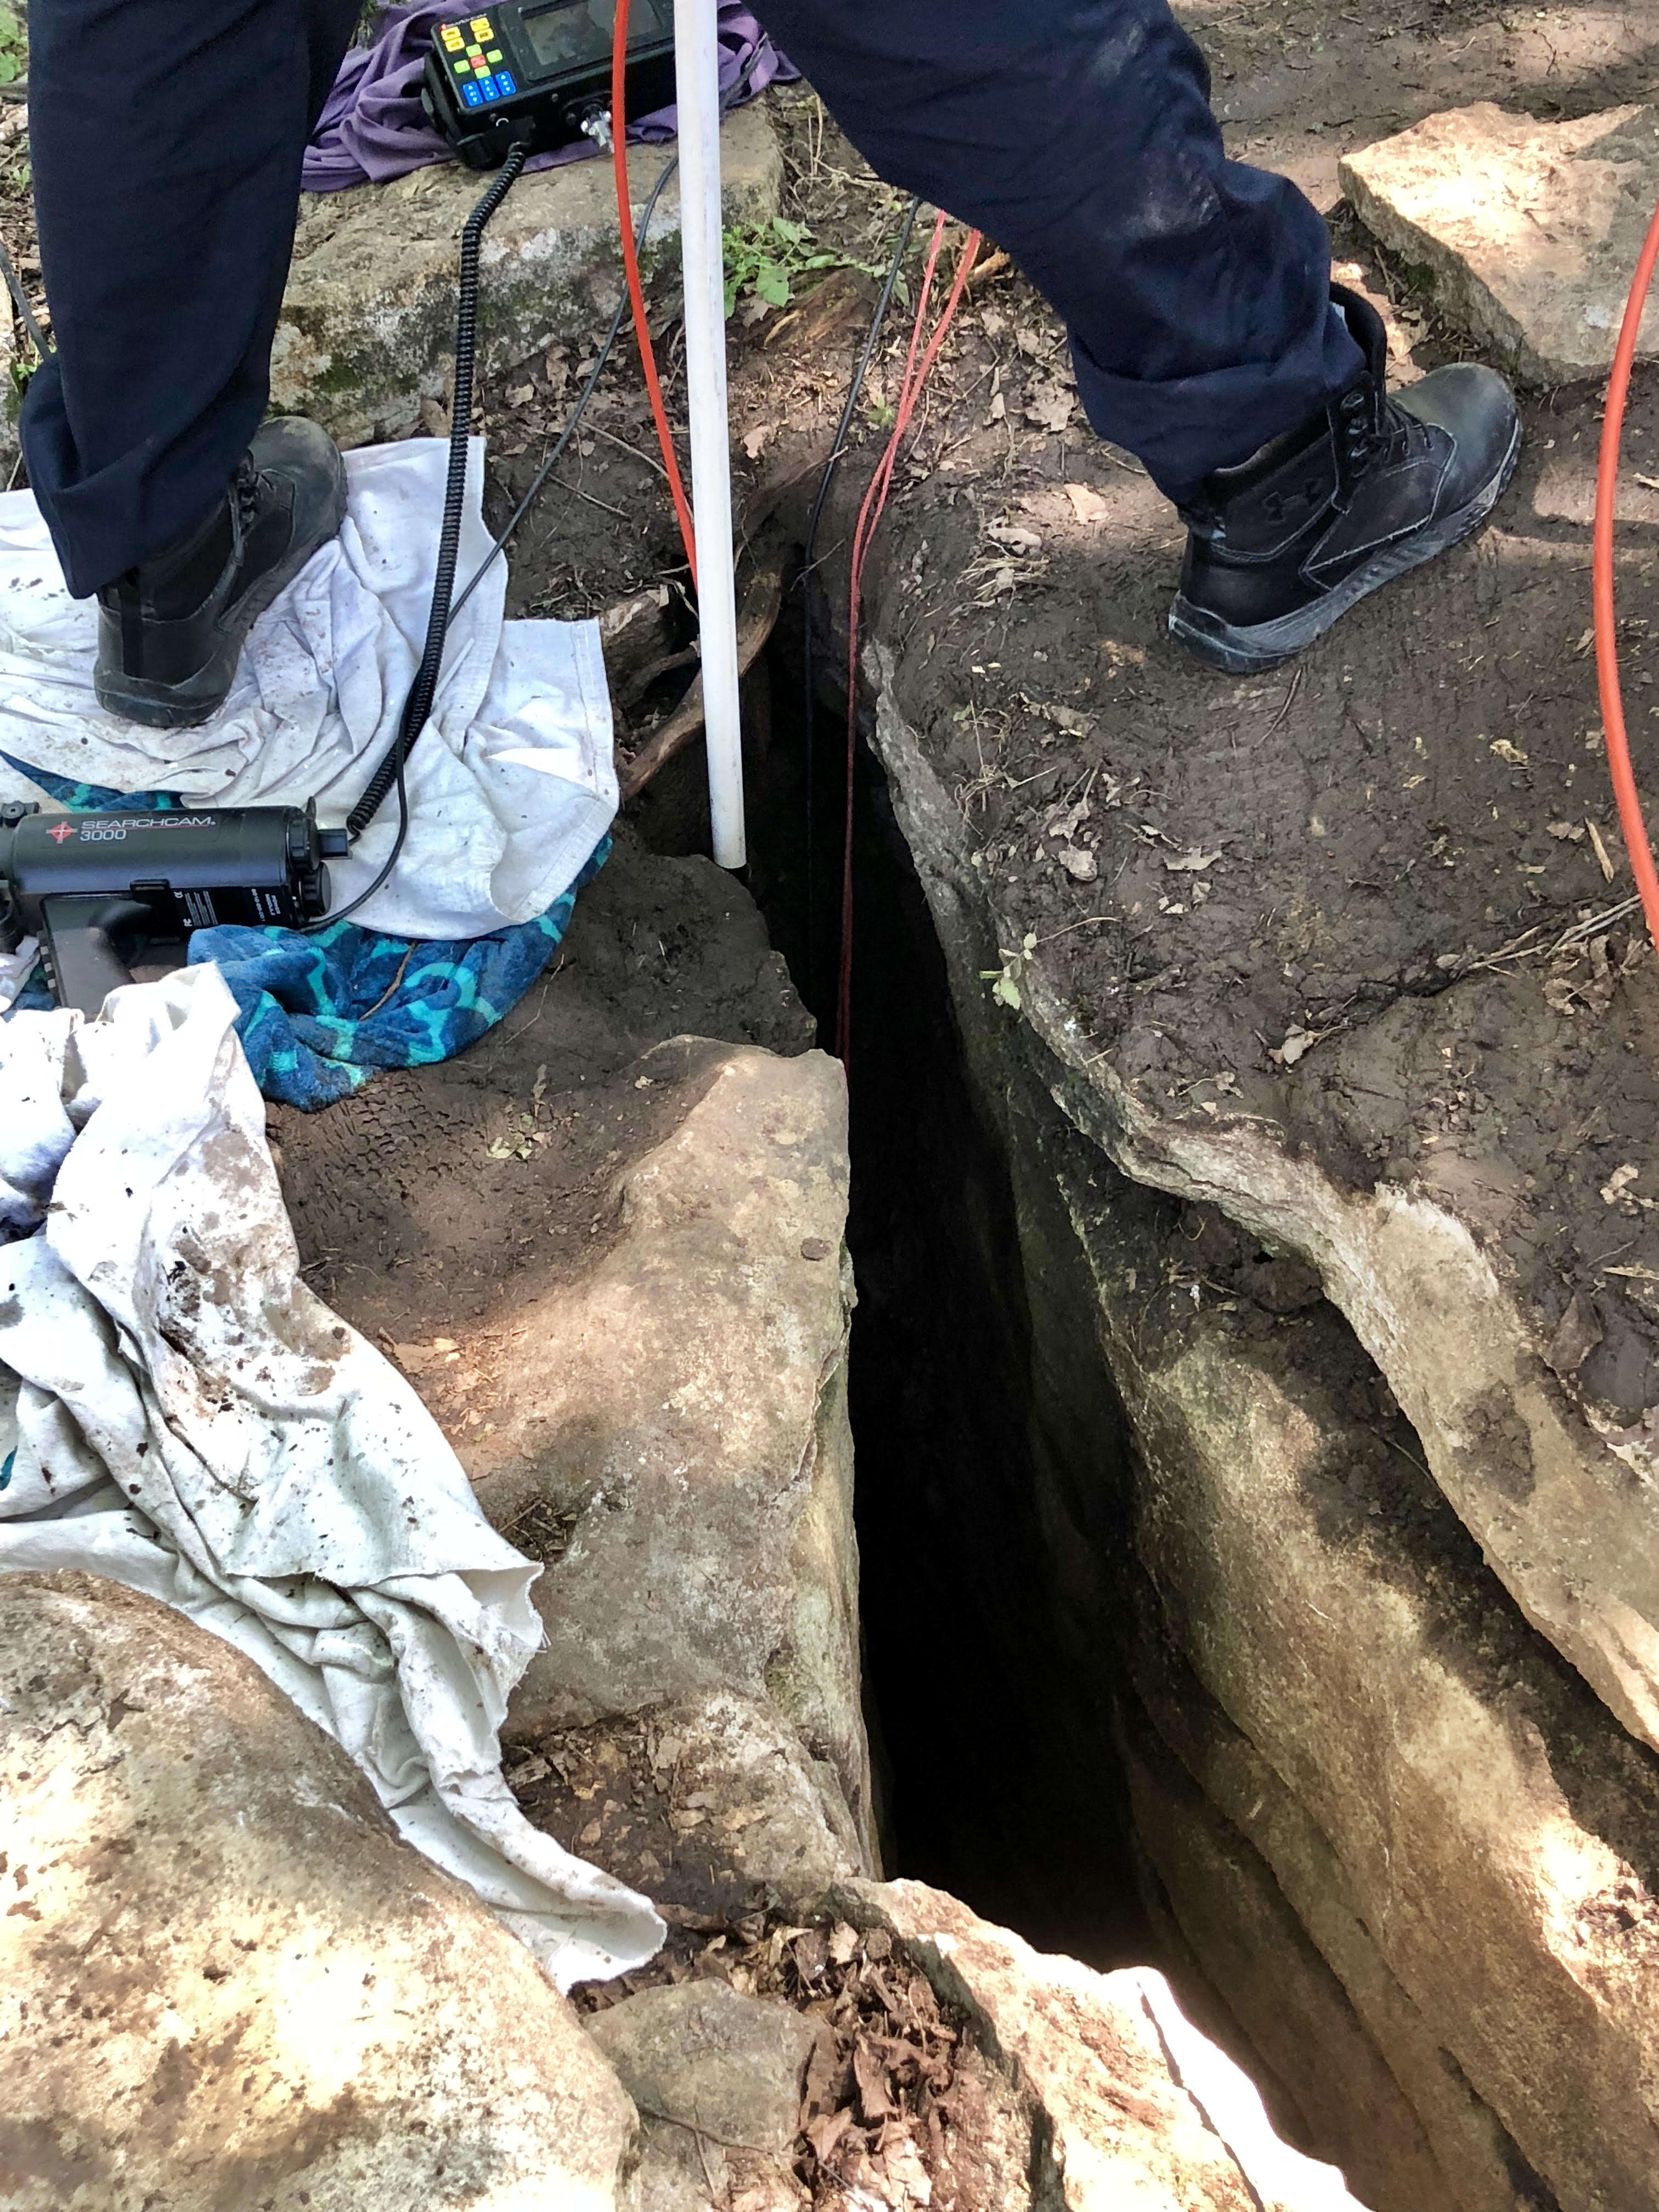 Rescuers trying to reach puppy at bottom of hole